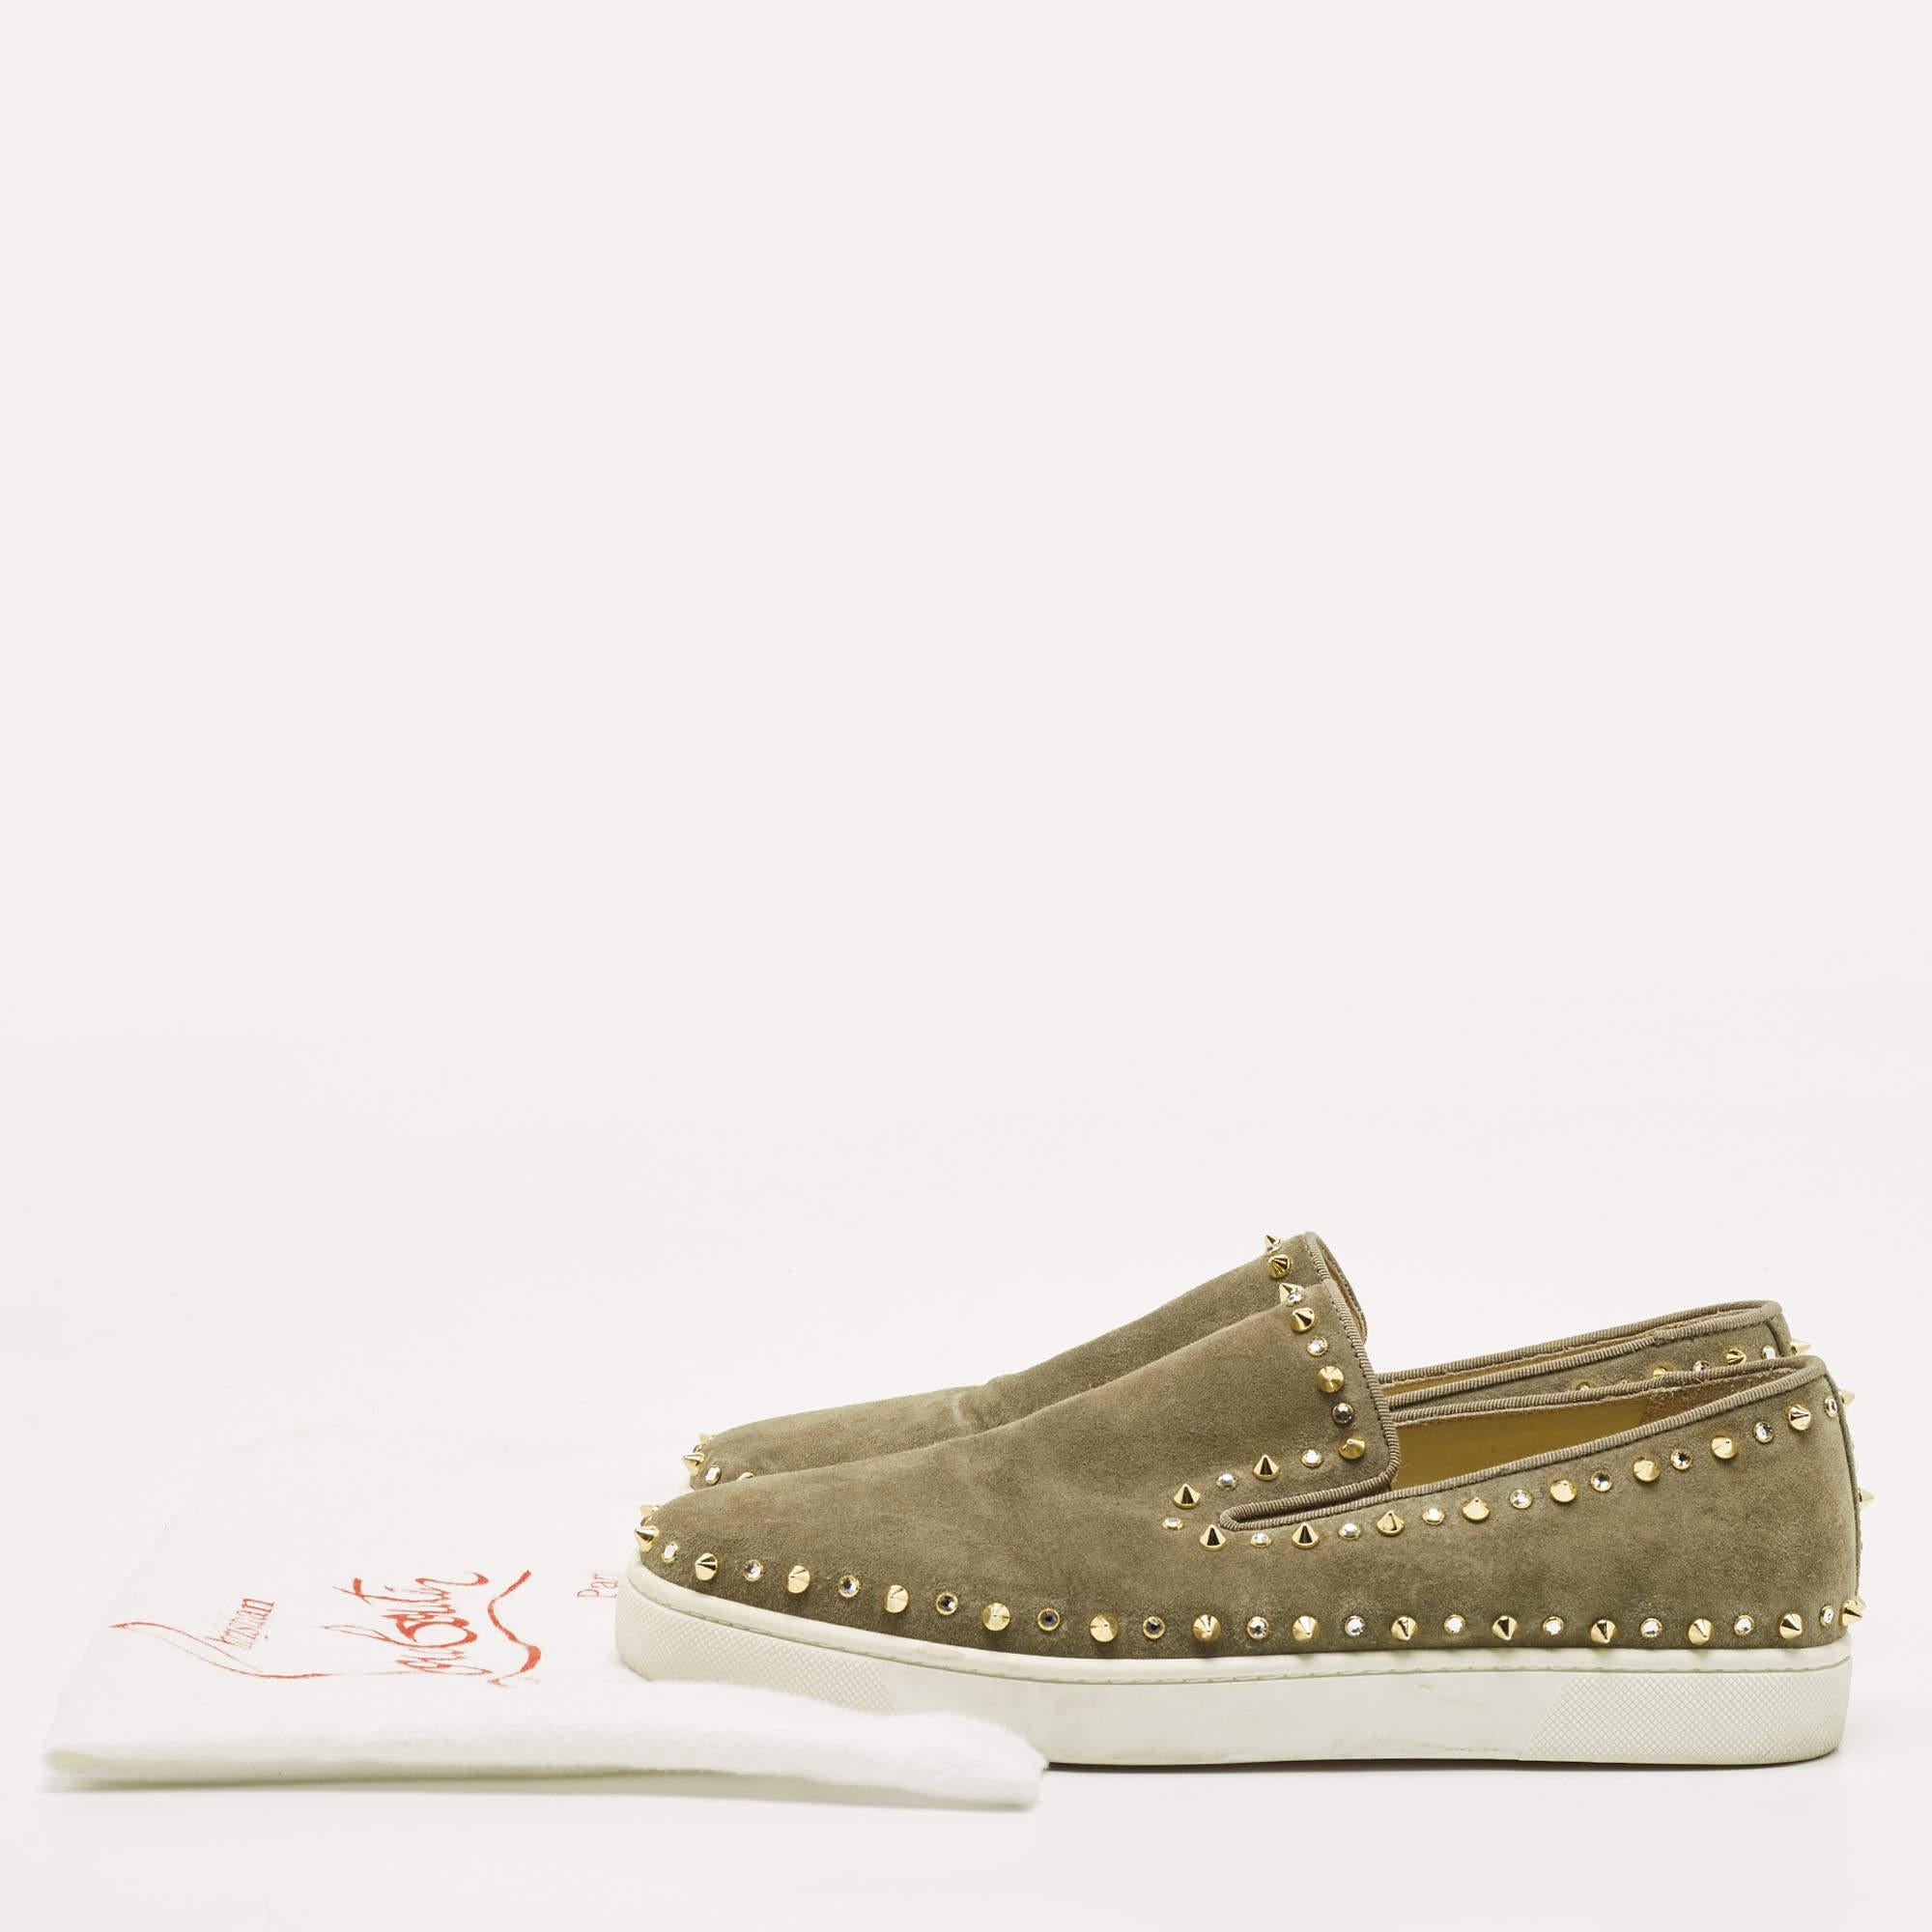 Christian Louboutin Green Suede Embellished Pik Boat Sneakers Size 43 5